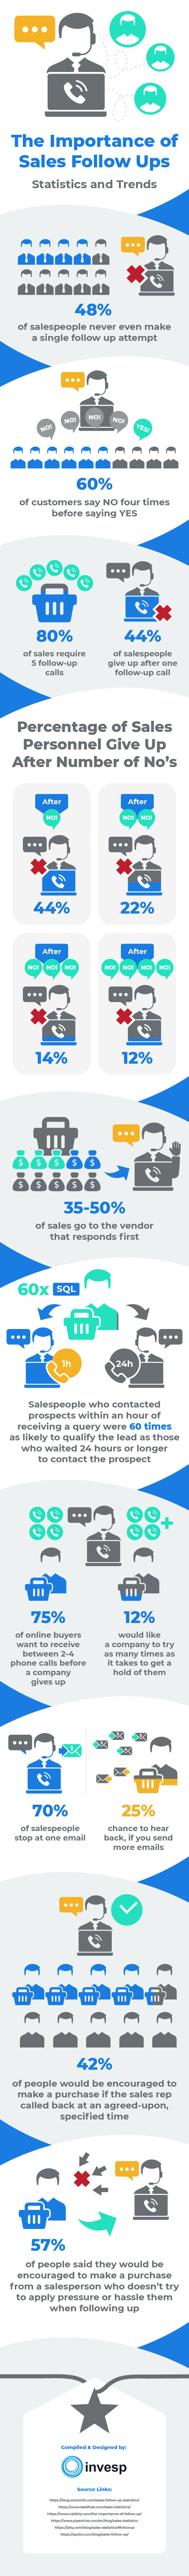 The importance of Sales Follow Ups – Statistics and Trends